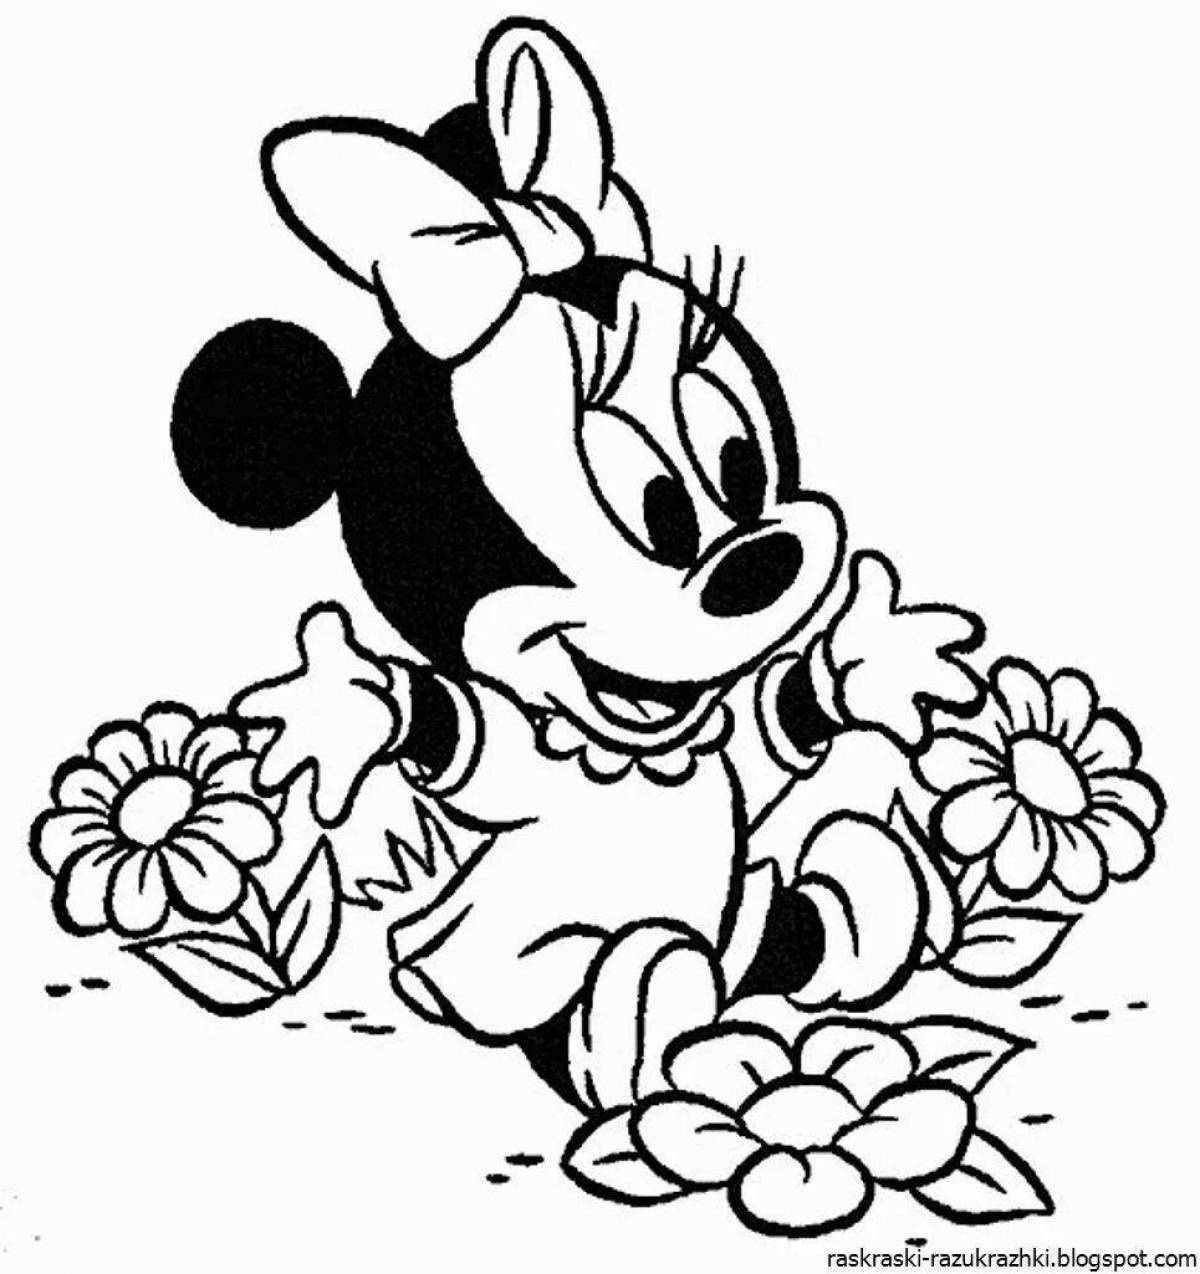 Minnie's amazing coloring page